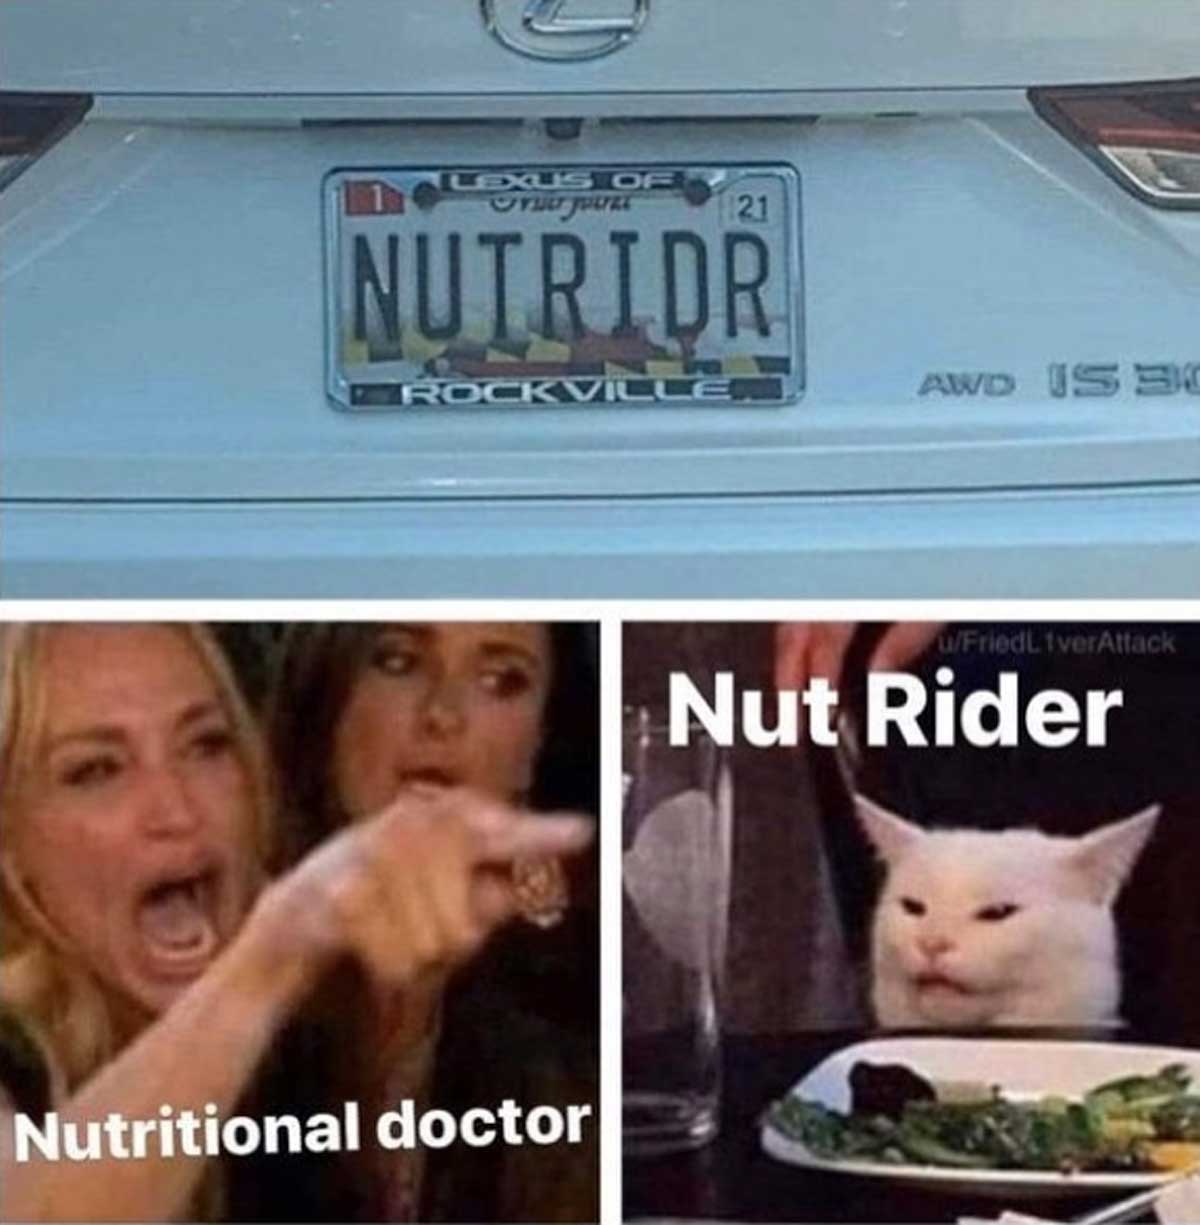 woman yelling at a cat meme about a license plate that says 'NUTRIDR' and the woman is yelling Nutritional doctor and the cat is yelling Nut Rider